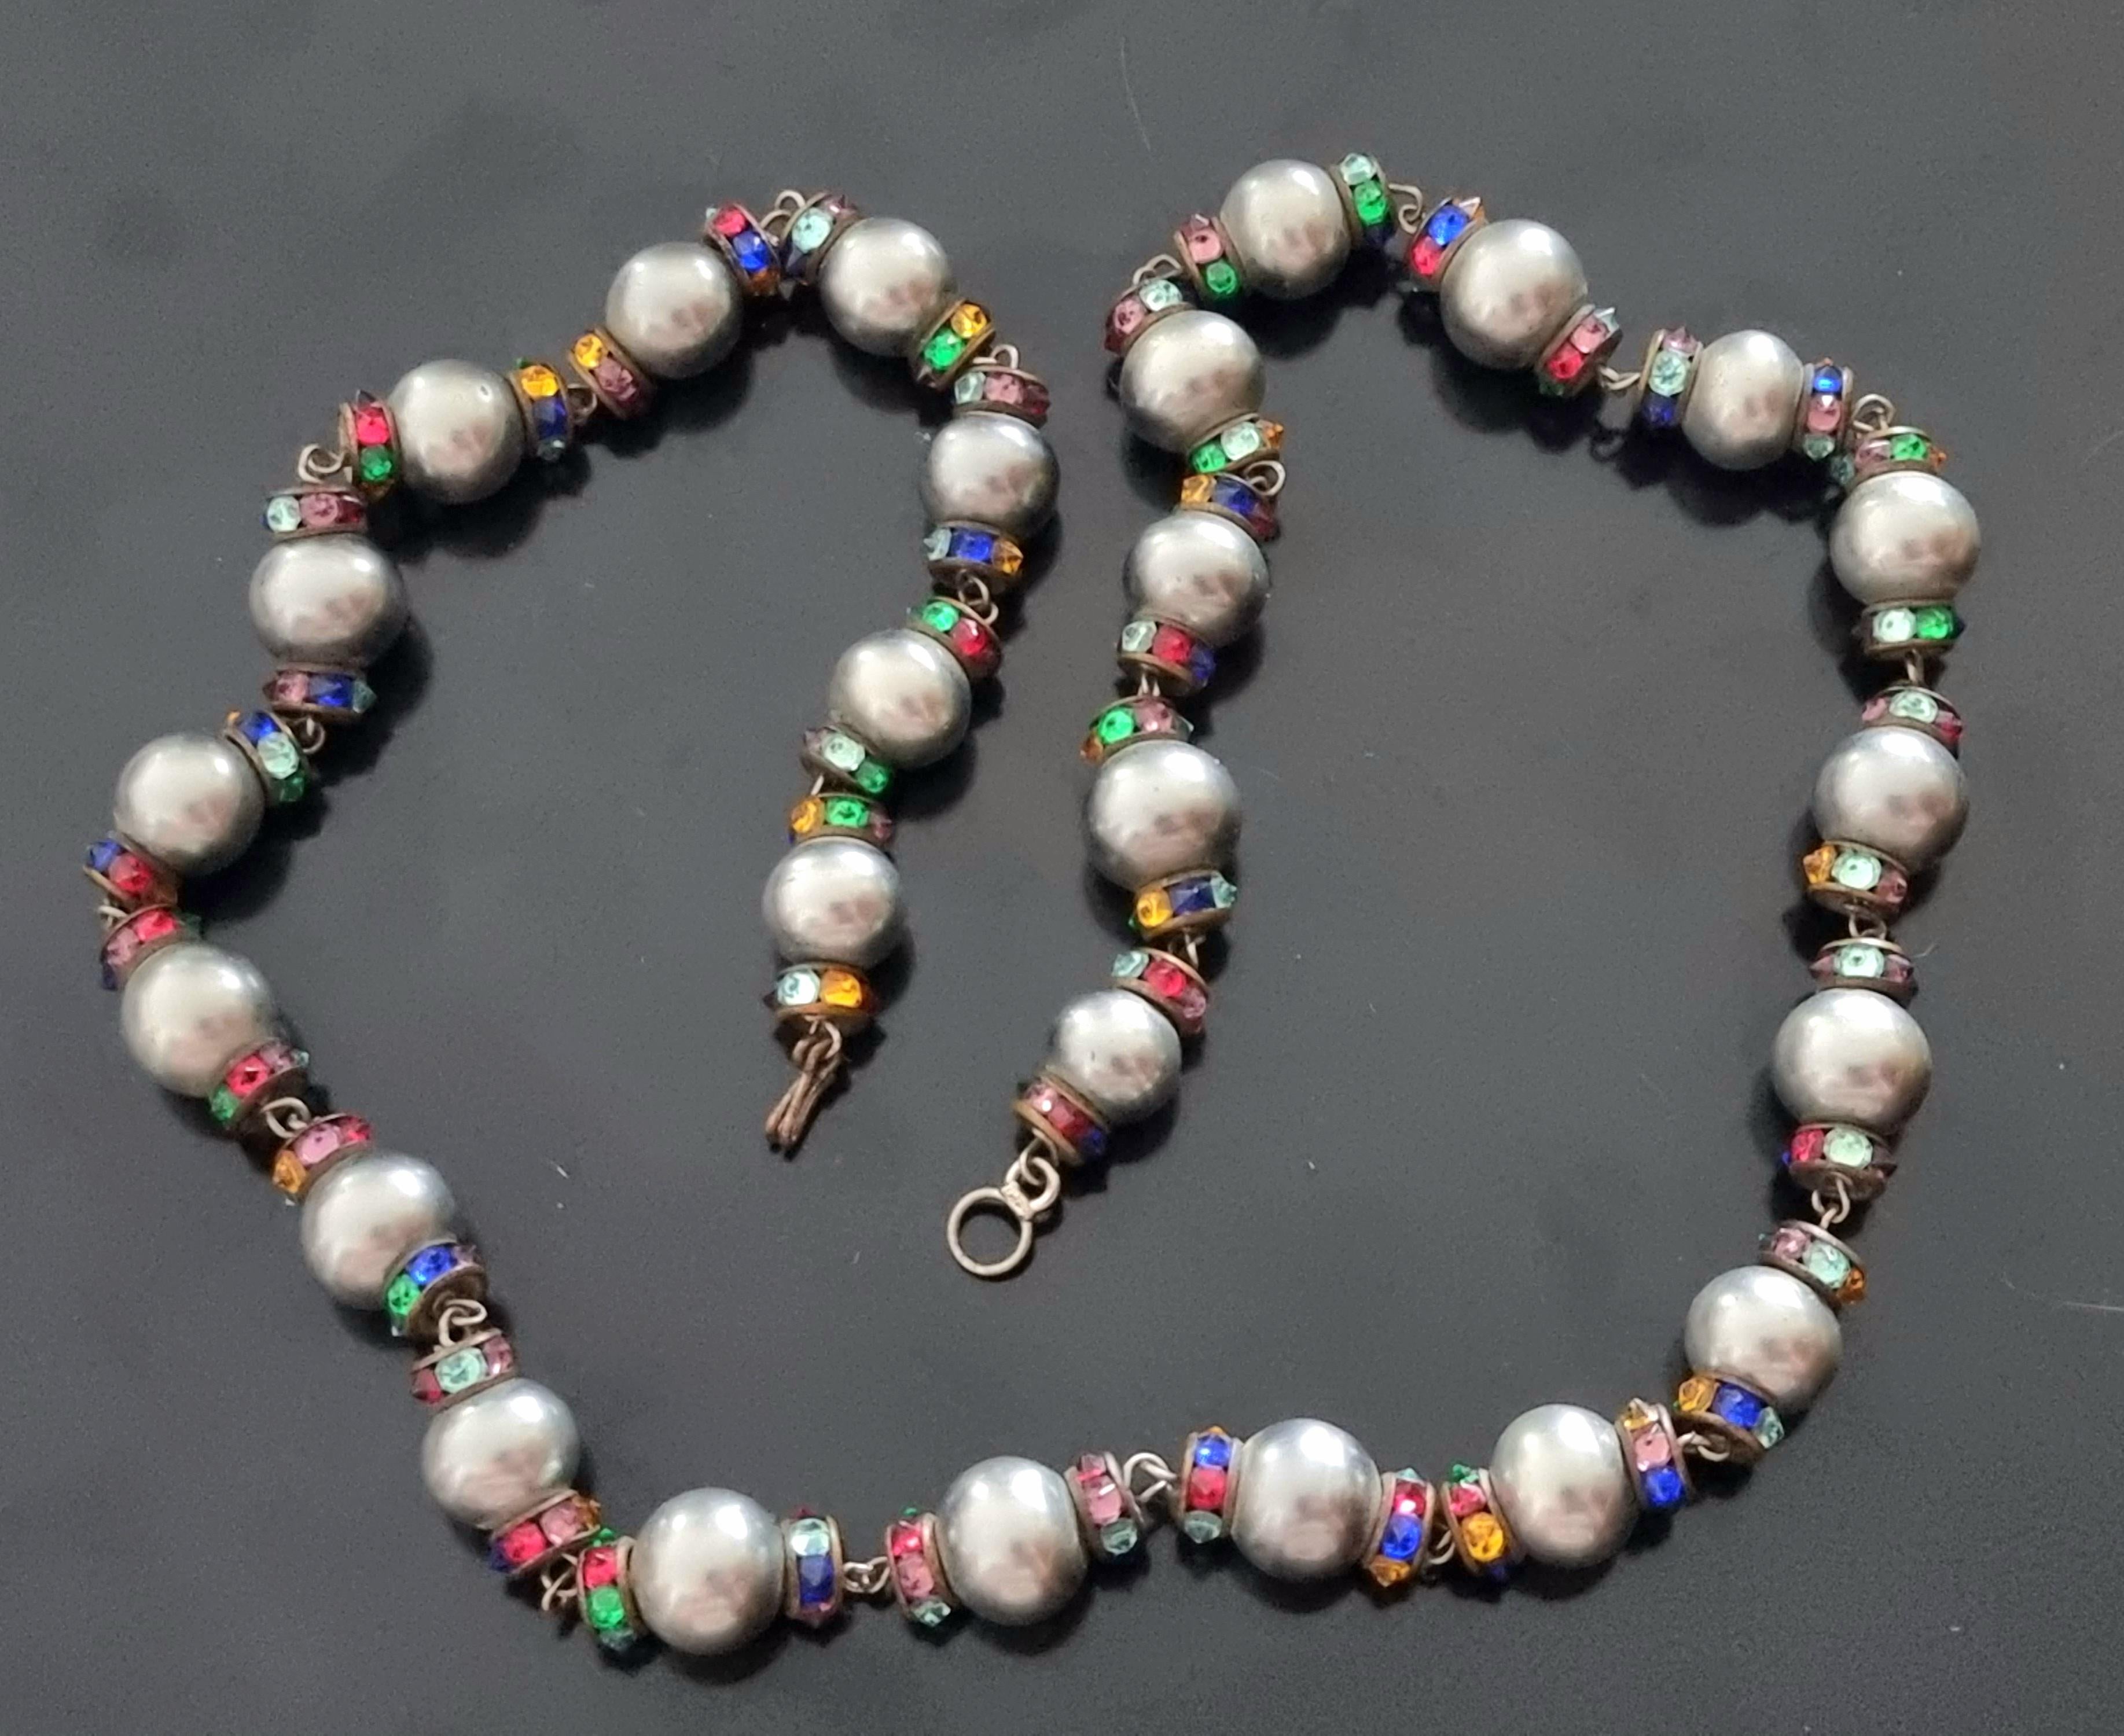 Old CHANEL necklace, Louis Rousselet pearls, rhinestones, vintage from the 40s 6